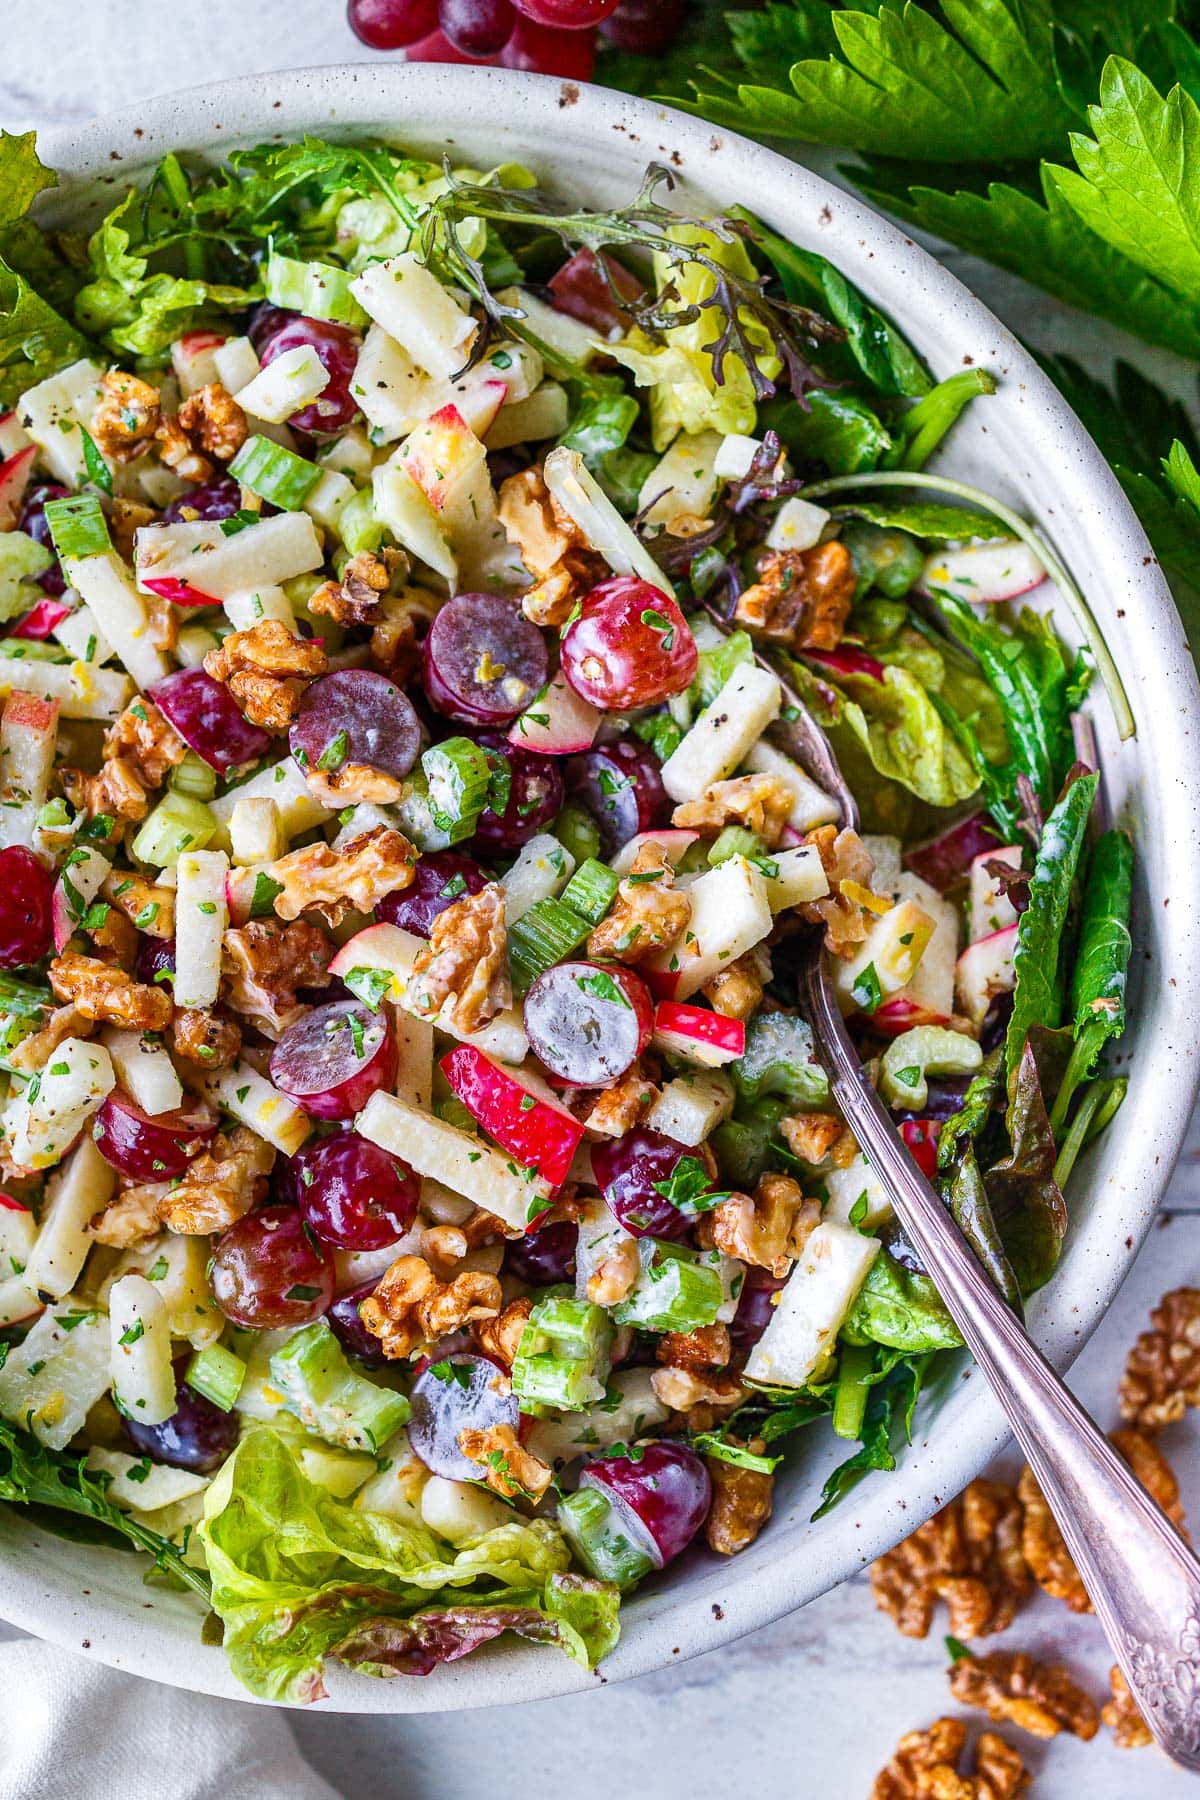 An updated lively version of the classic Waldorf Salad recipe combining the crisp sweetness of apples and grapes with the crunch of celery and walnuts, all tossed in a creamy Greek yogurt dressing for a refreshing and satisfying salad!